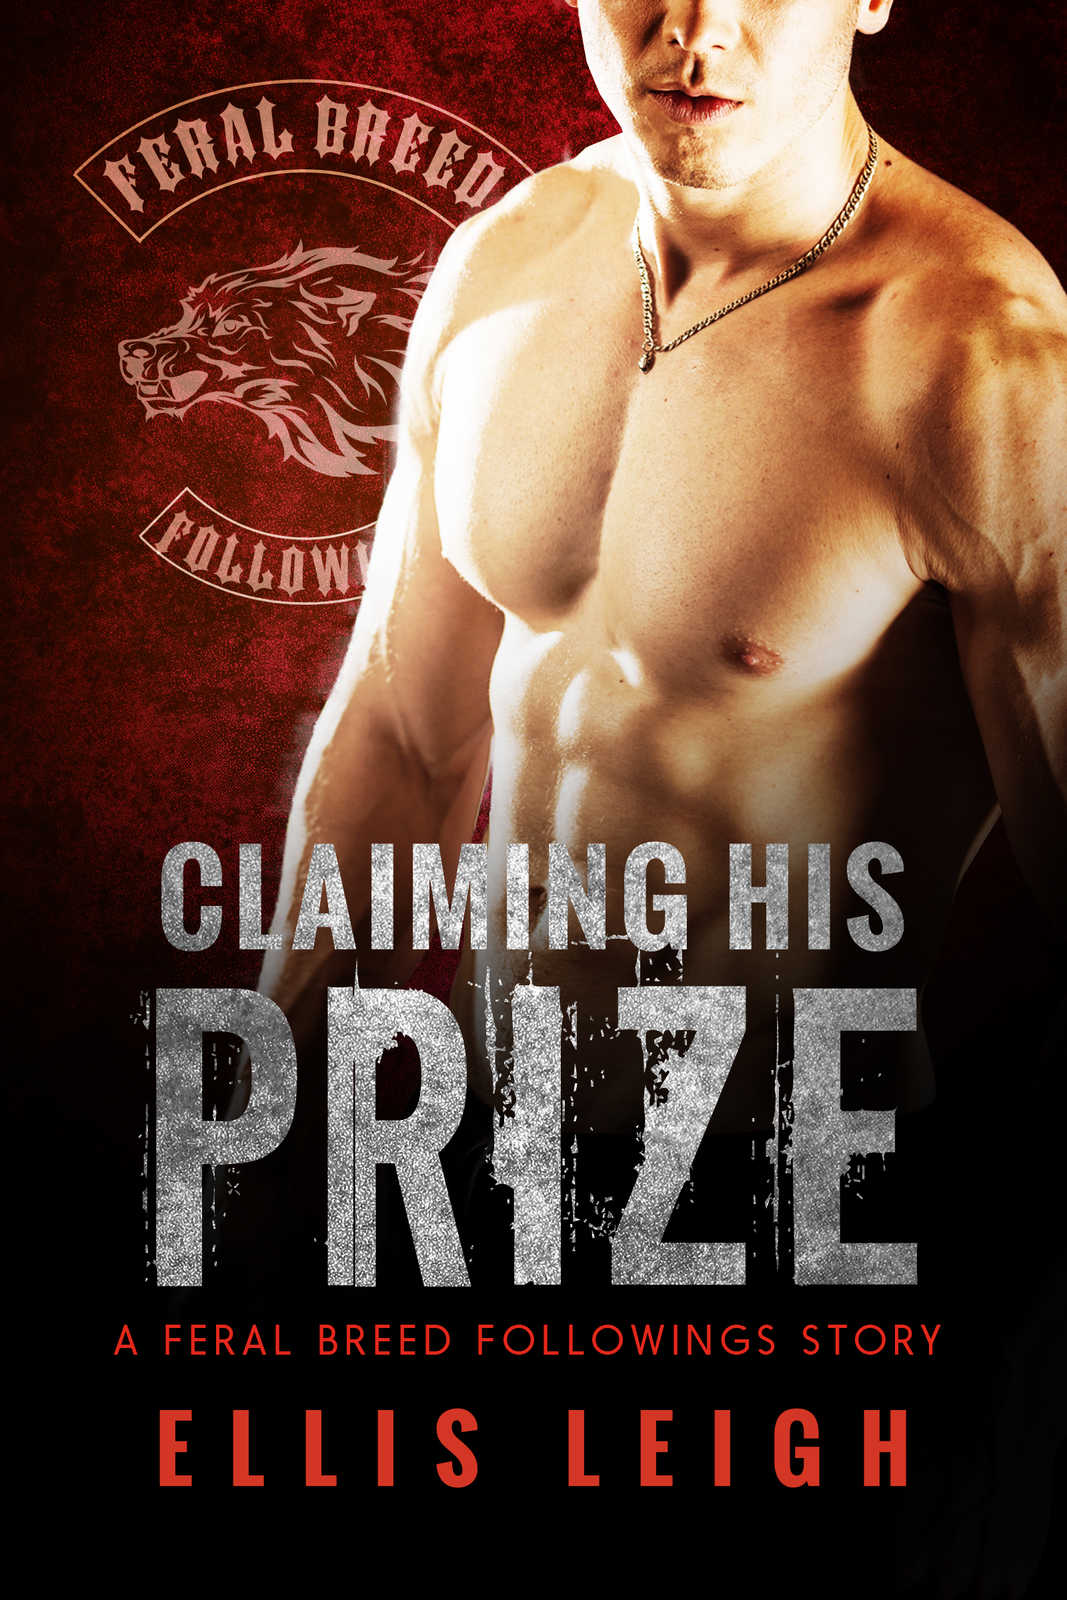 Claiming His Prize by Ellis Leigh